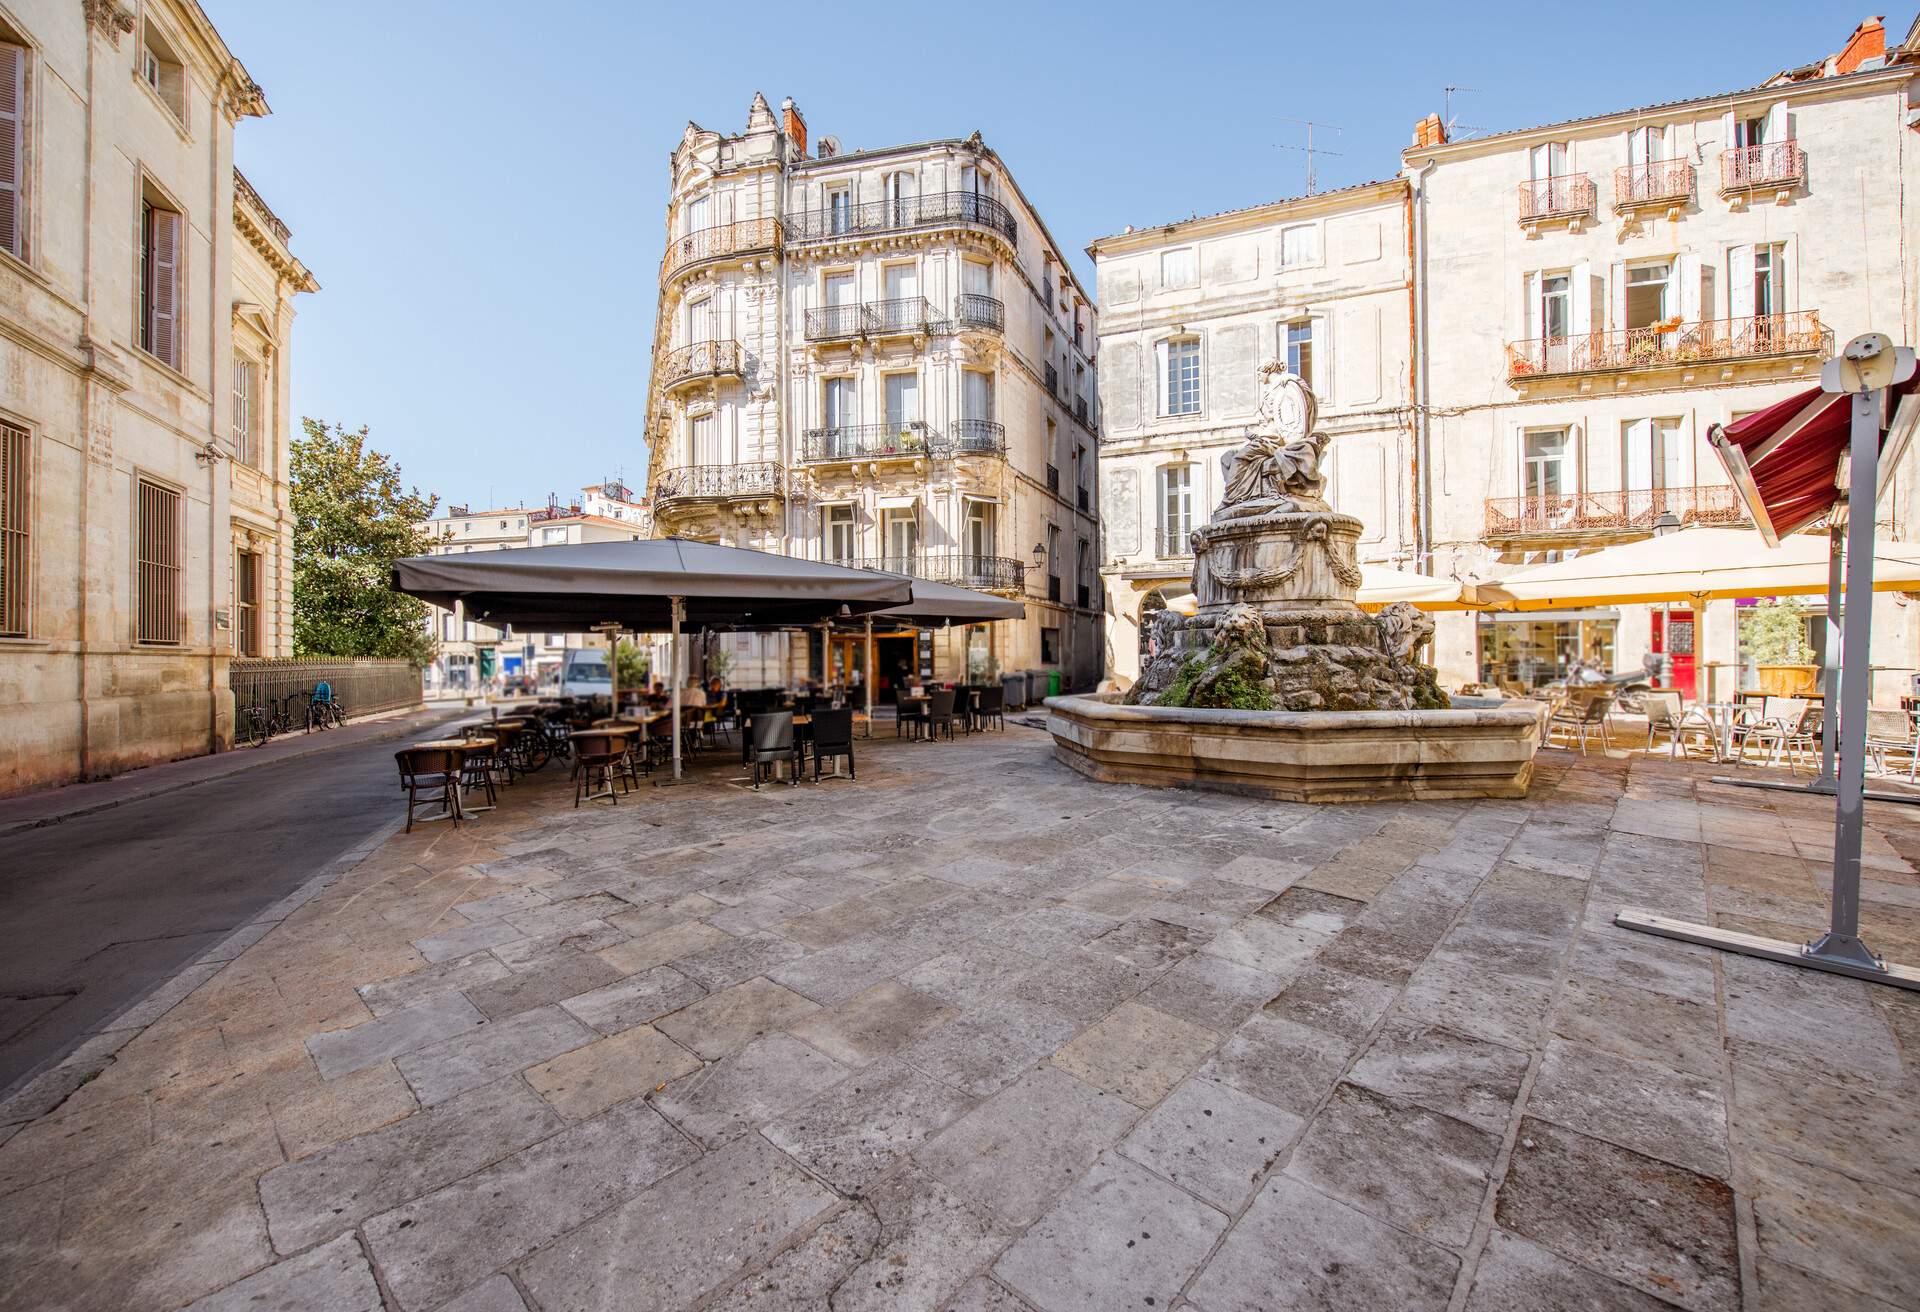 Street view at the old town with cafe terrace in Montpellier city in Occitanie region of France